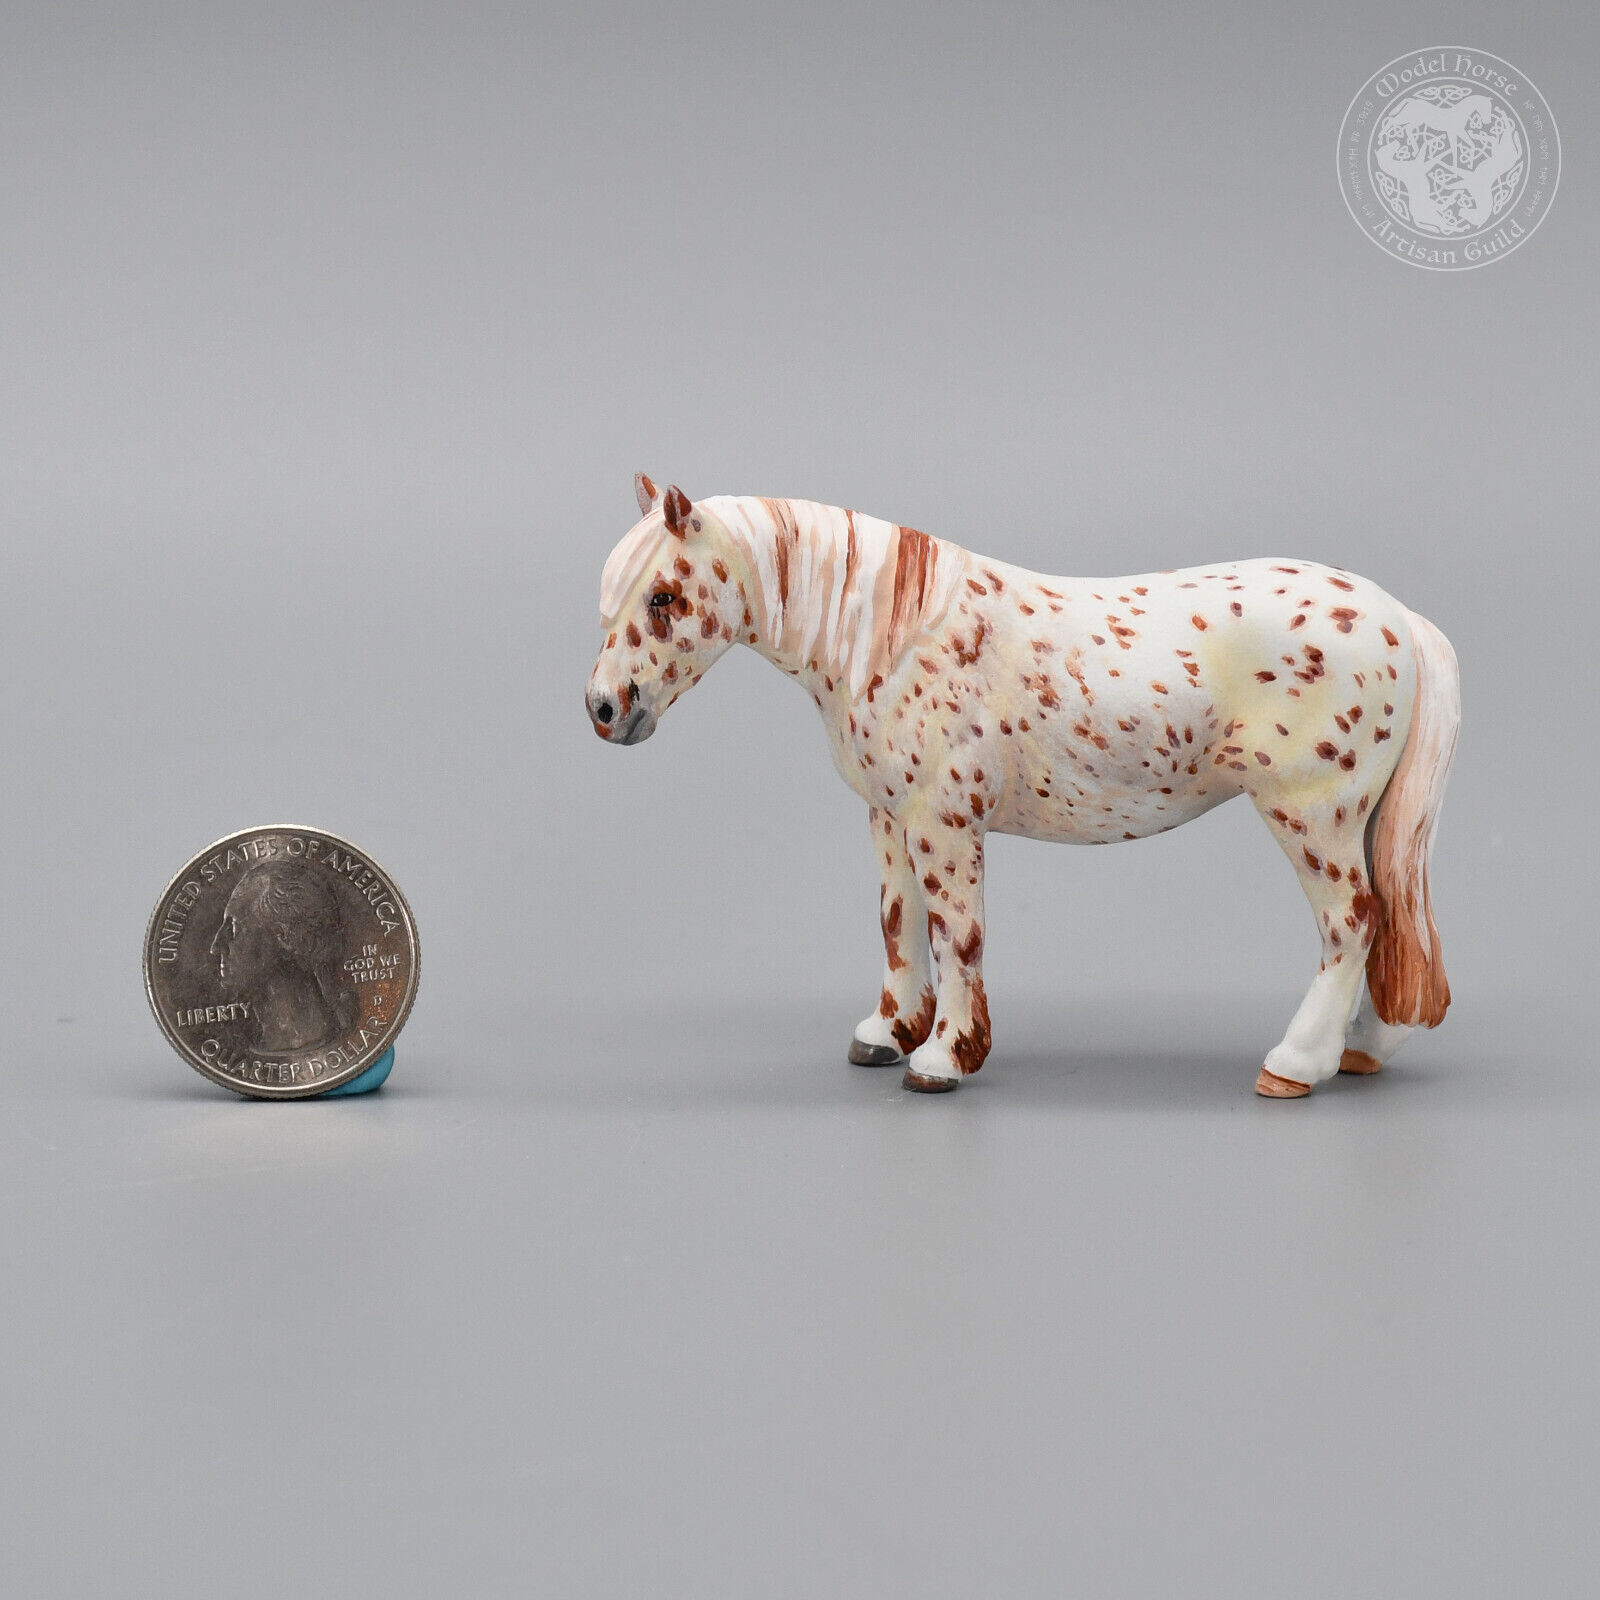 3D Printed Hand Painted Bay Large Appaloosa Pony - Stablemate 1:32 Scale